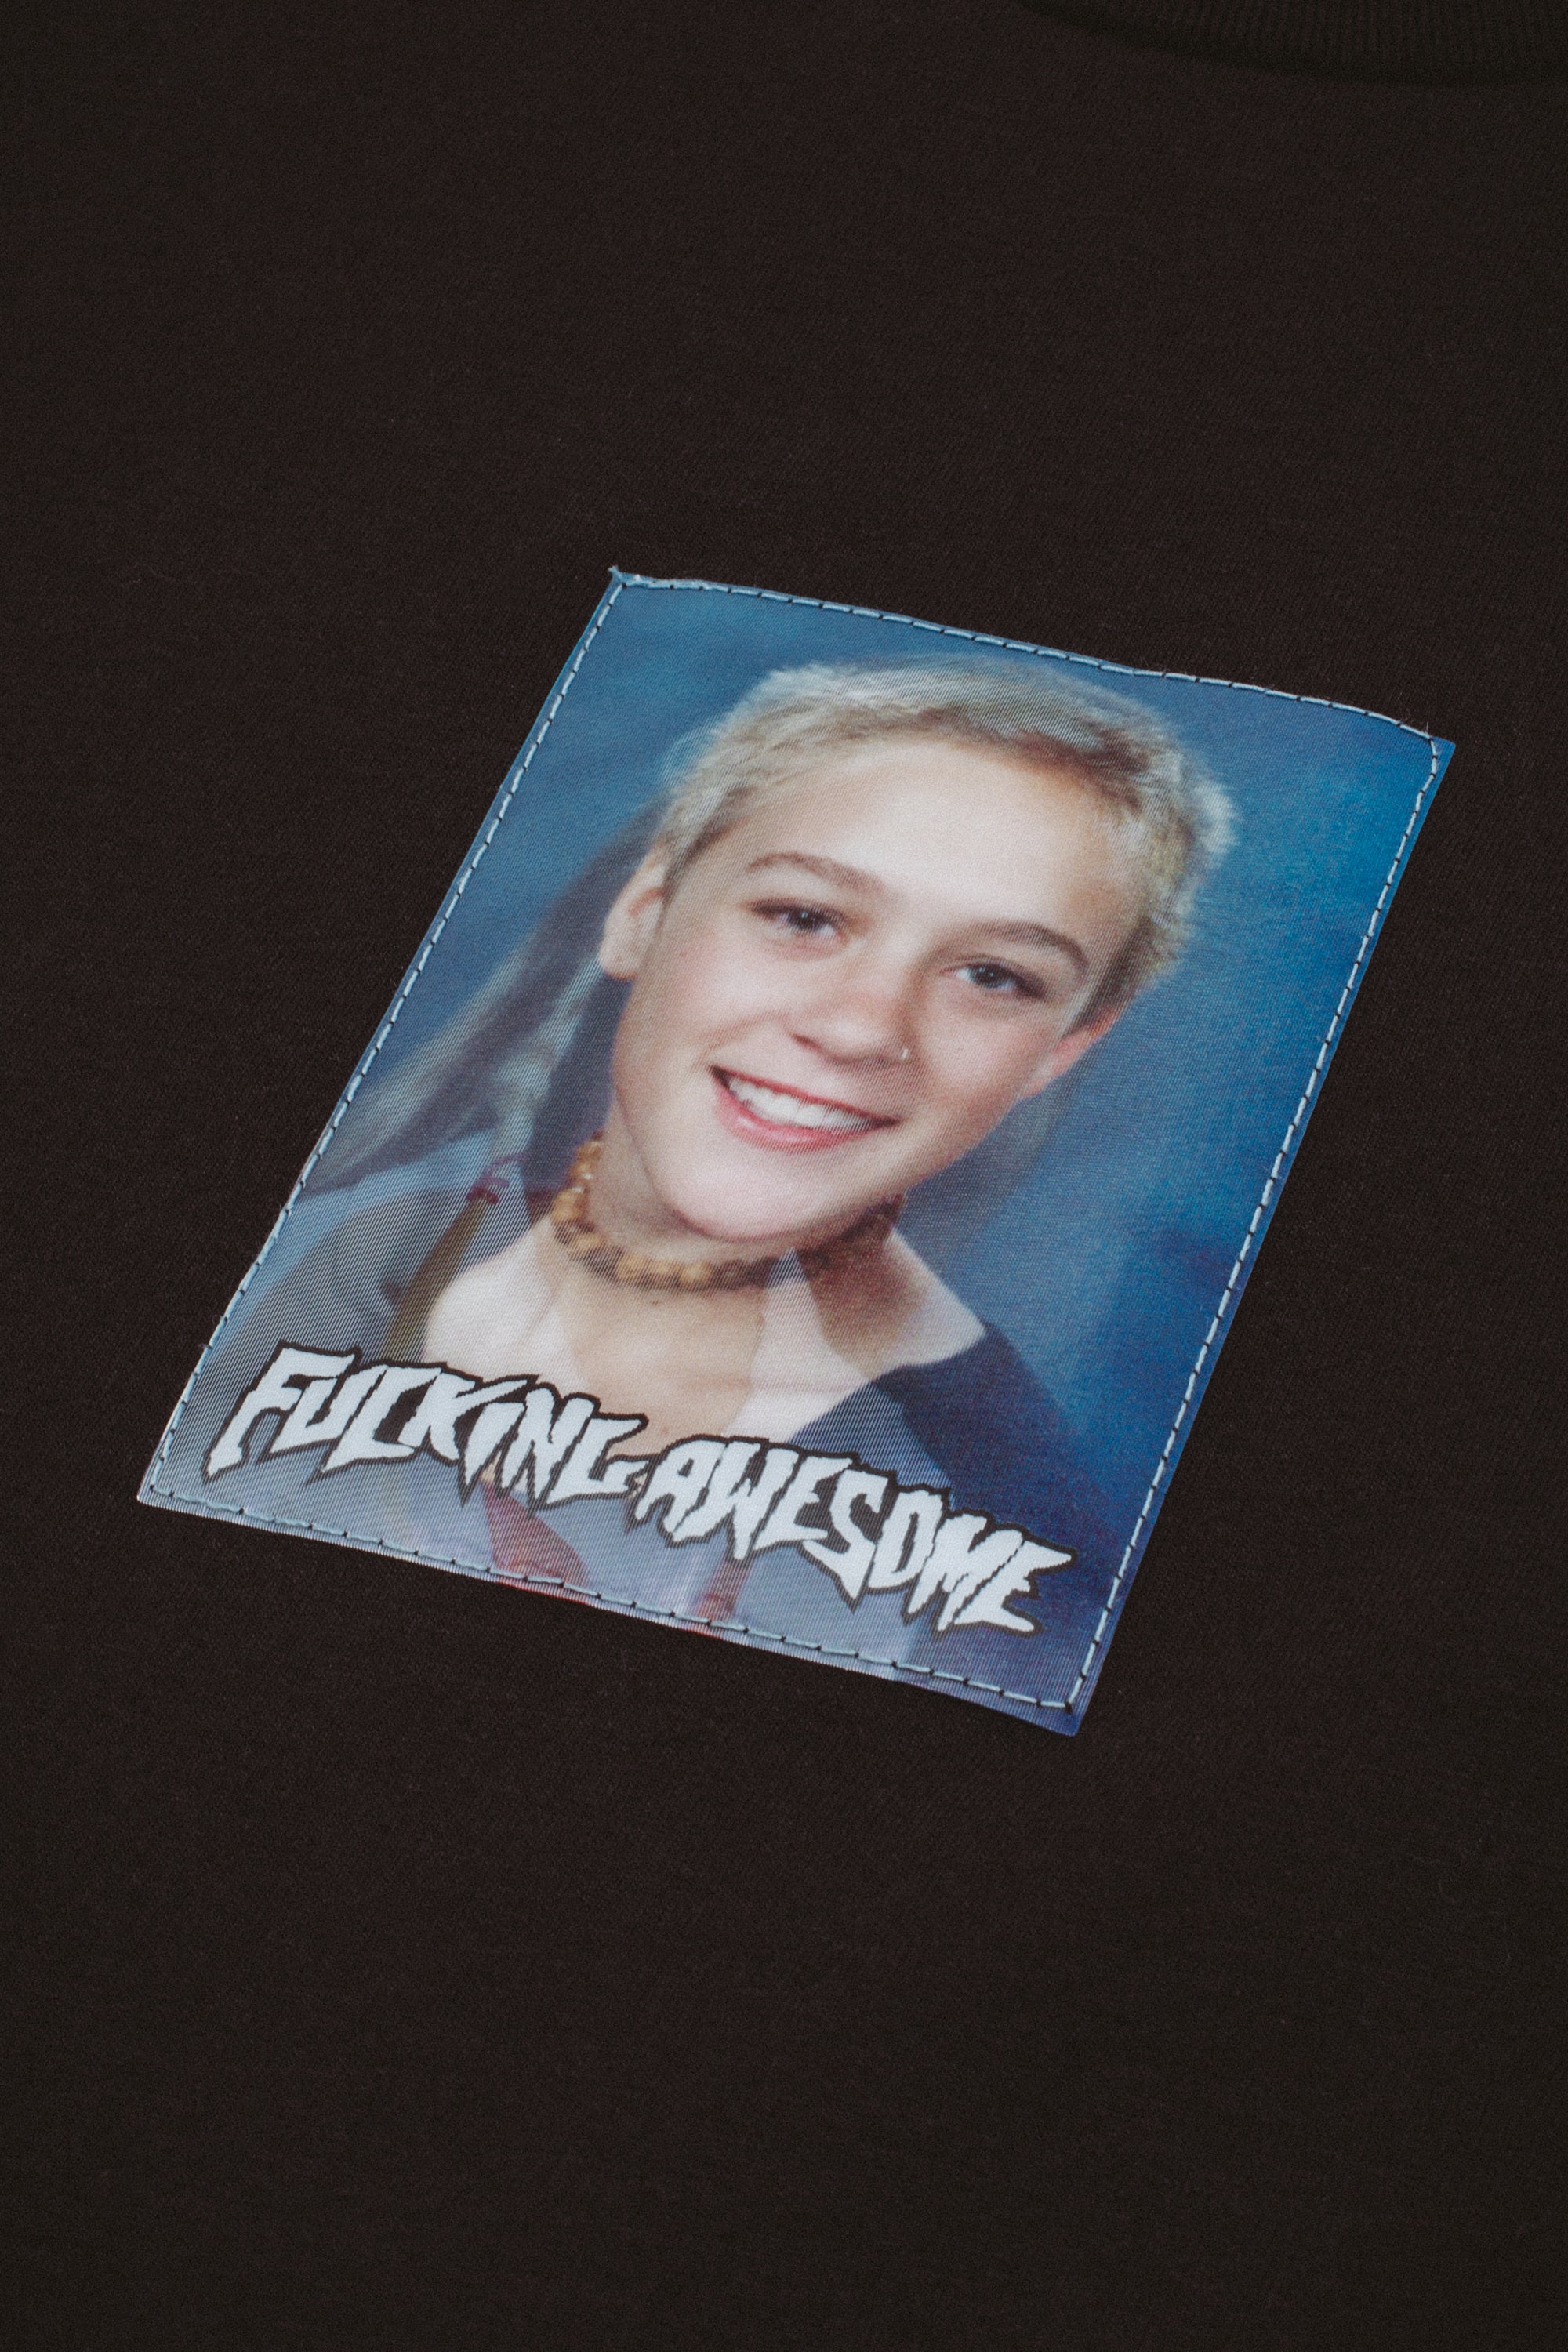 Chloë Lenticular Tee – Fucking Awesome